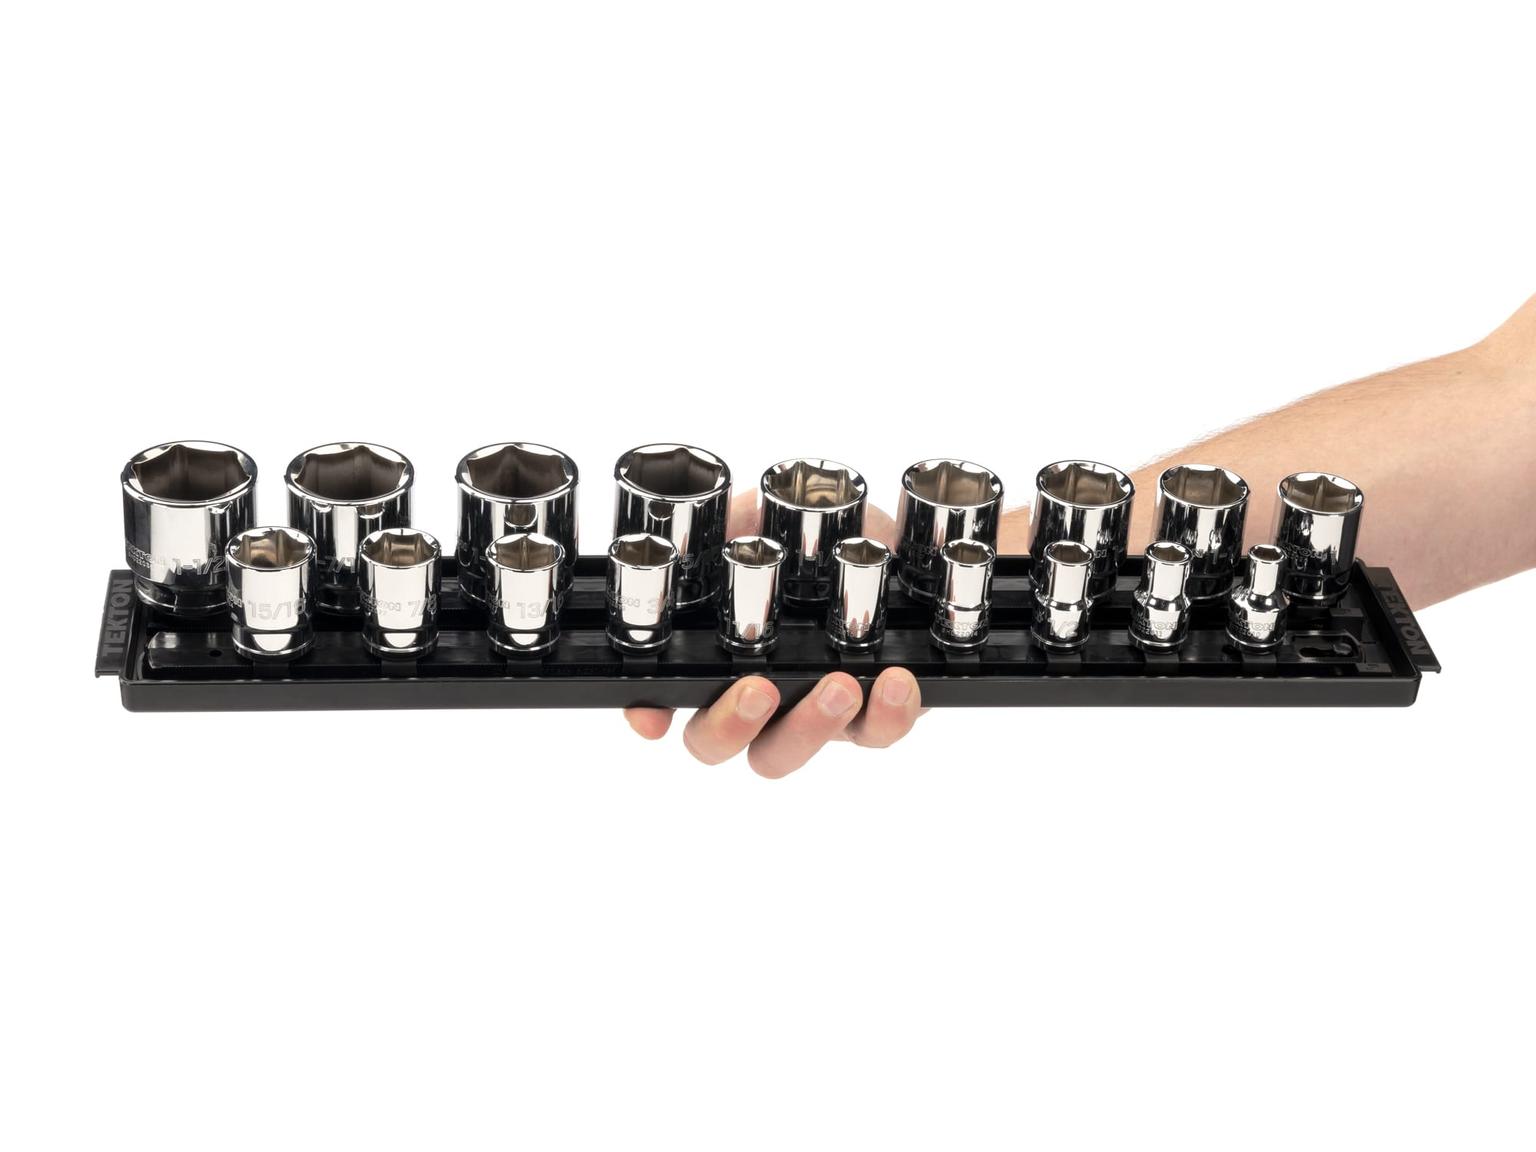 TEKTON SHD92122-T 1/2 Inch Drive 6-Point Socket Set with Rails, 19-Piece (3/8-1-1/2 in.)